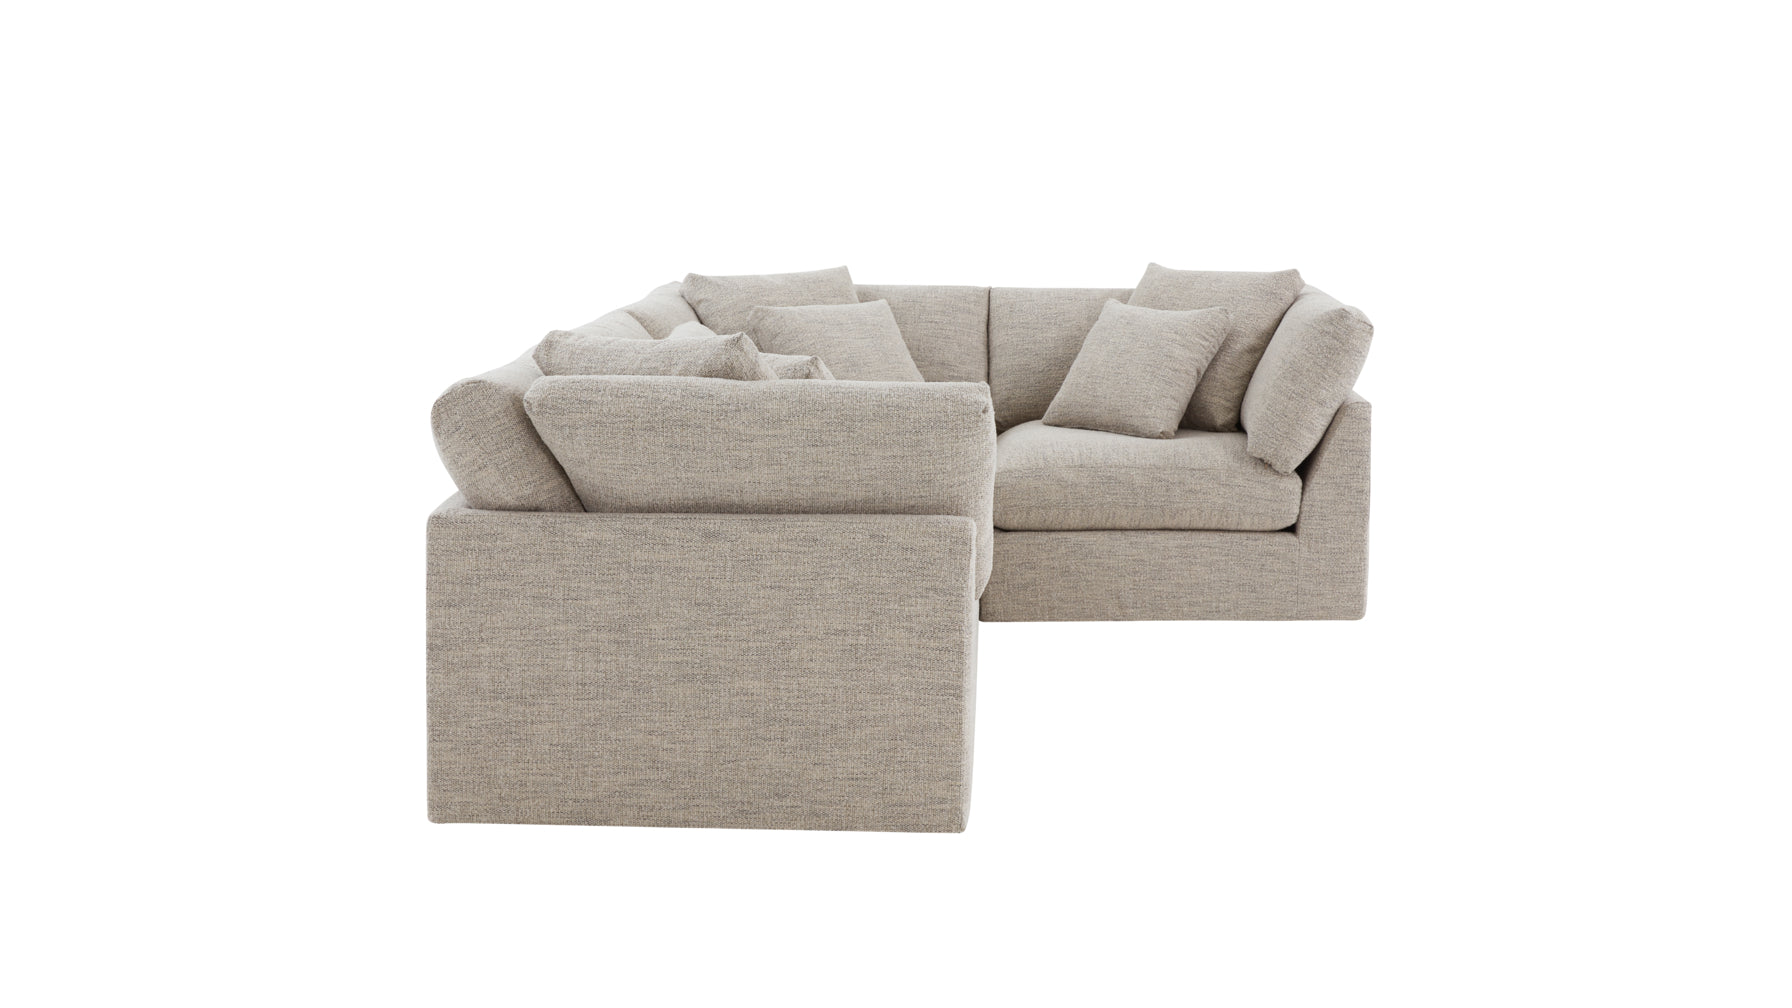 Get Together™ 4-Piece Modular Sectional Closed, Large, Oatmeal - Image 6